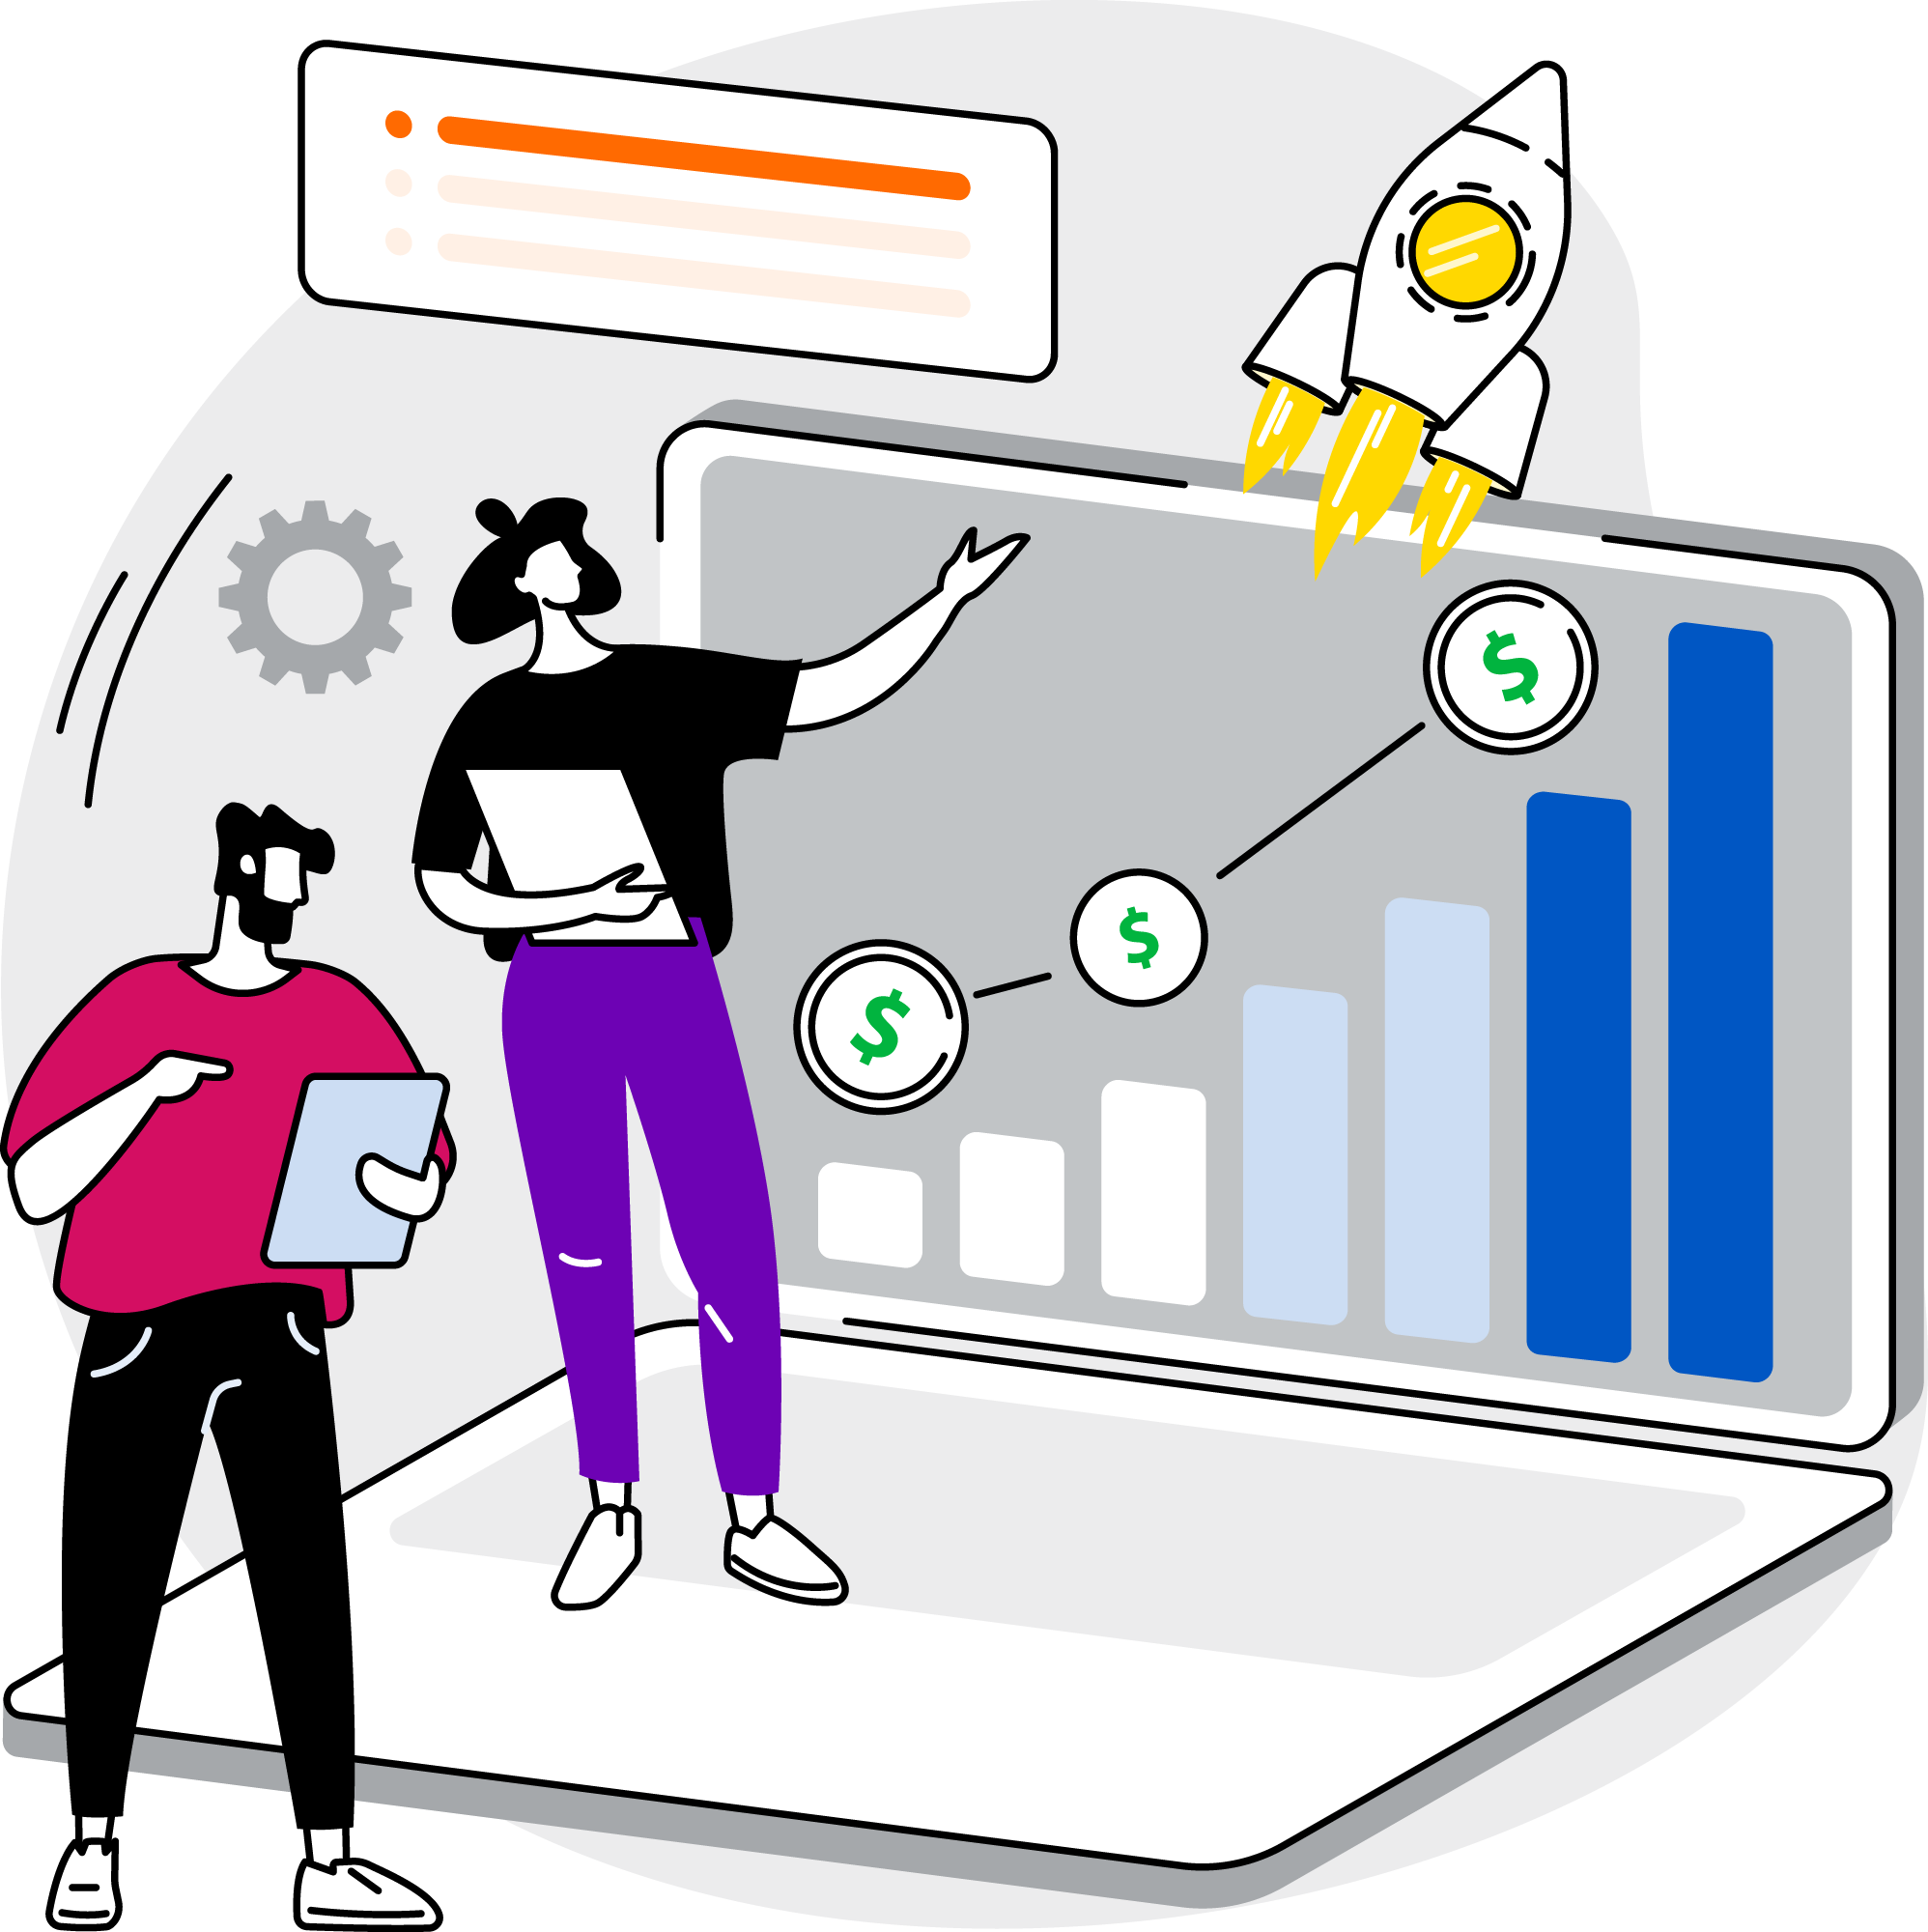 A colorful 2D illustration of two people looking at a financial growth chart, with a rocketship taking off along the same path.